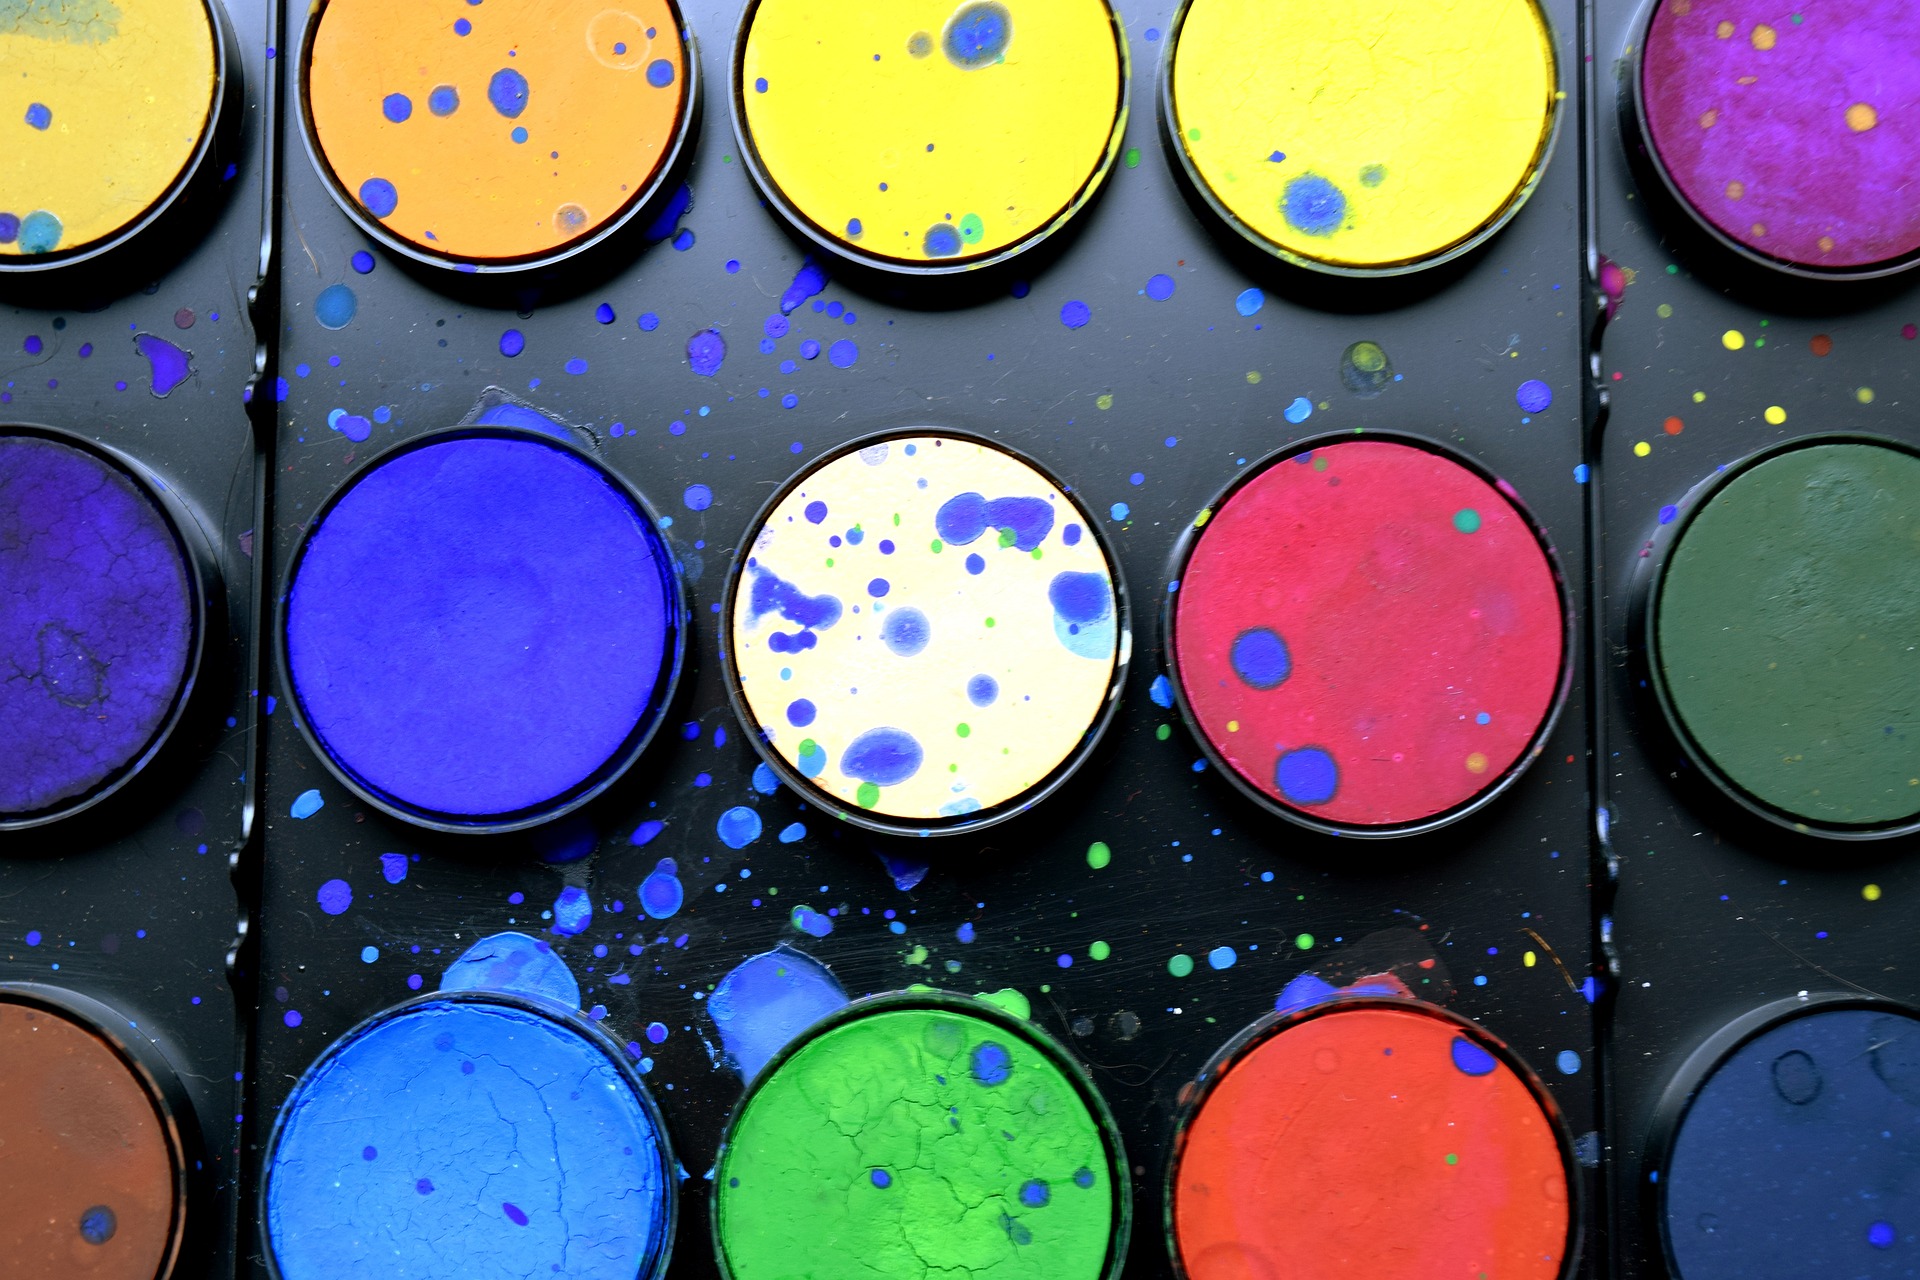 A set of water color paints, splattered with paint.